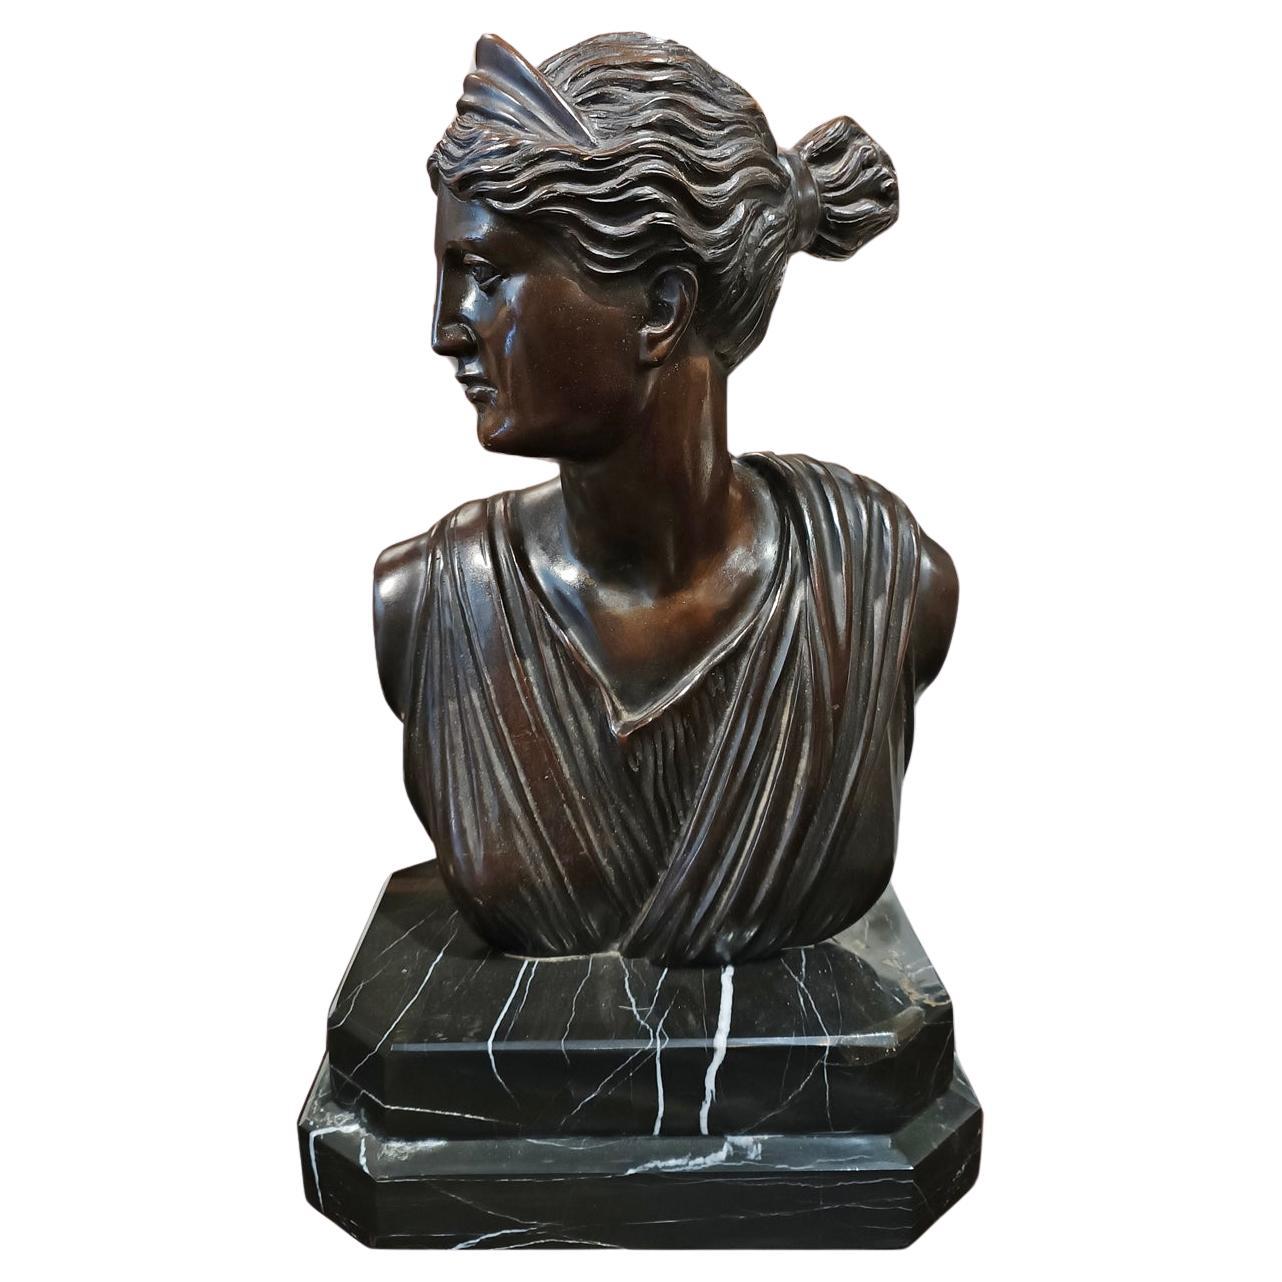 EARLY 19th CENTURY BRONZE DIANA'S BUST SCULPTURE For Sale